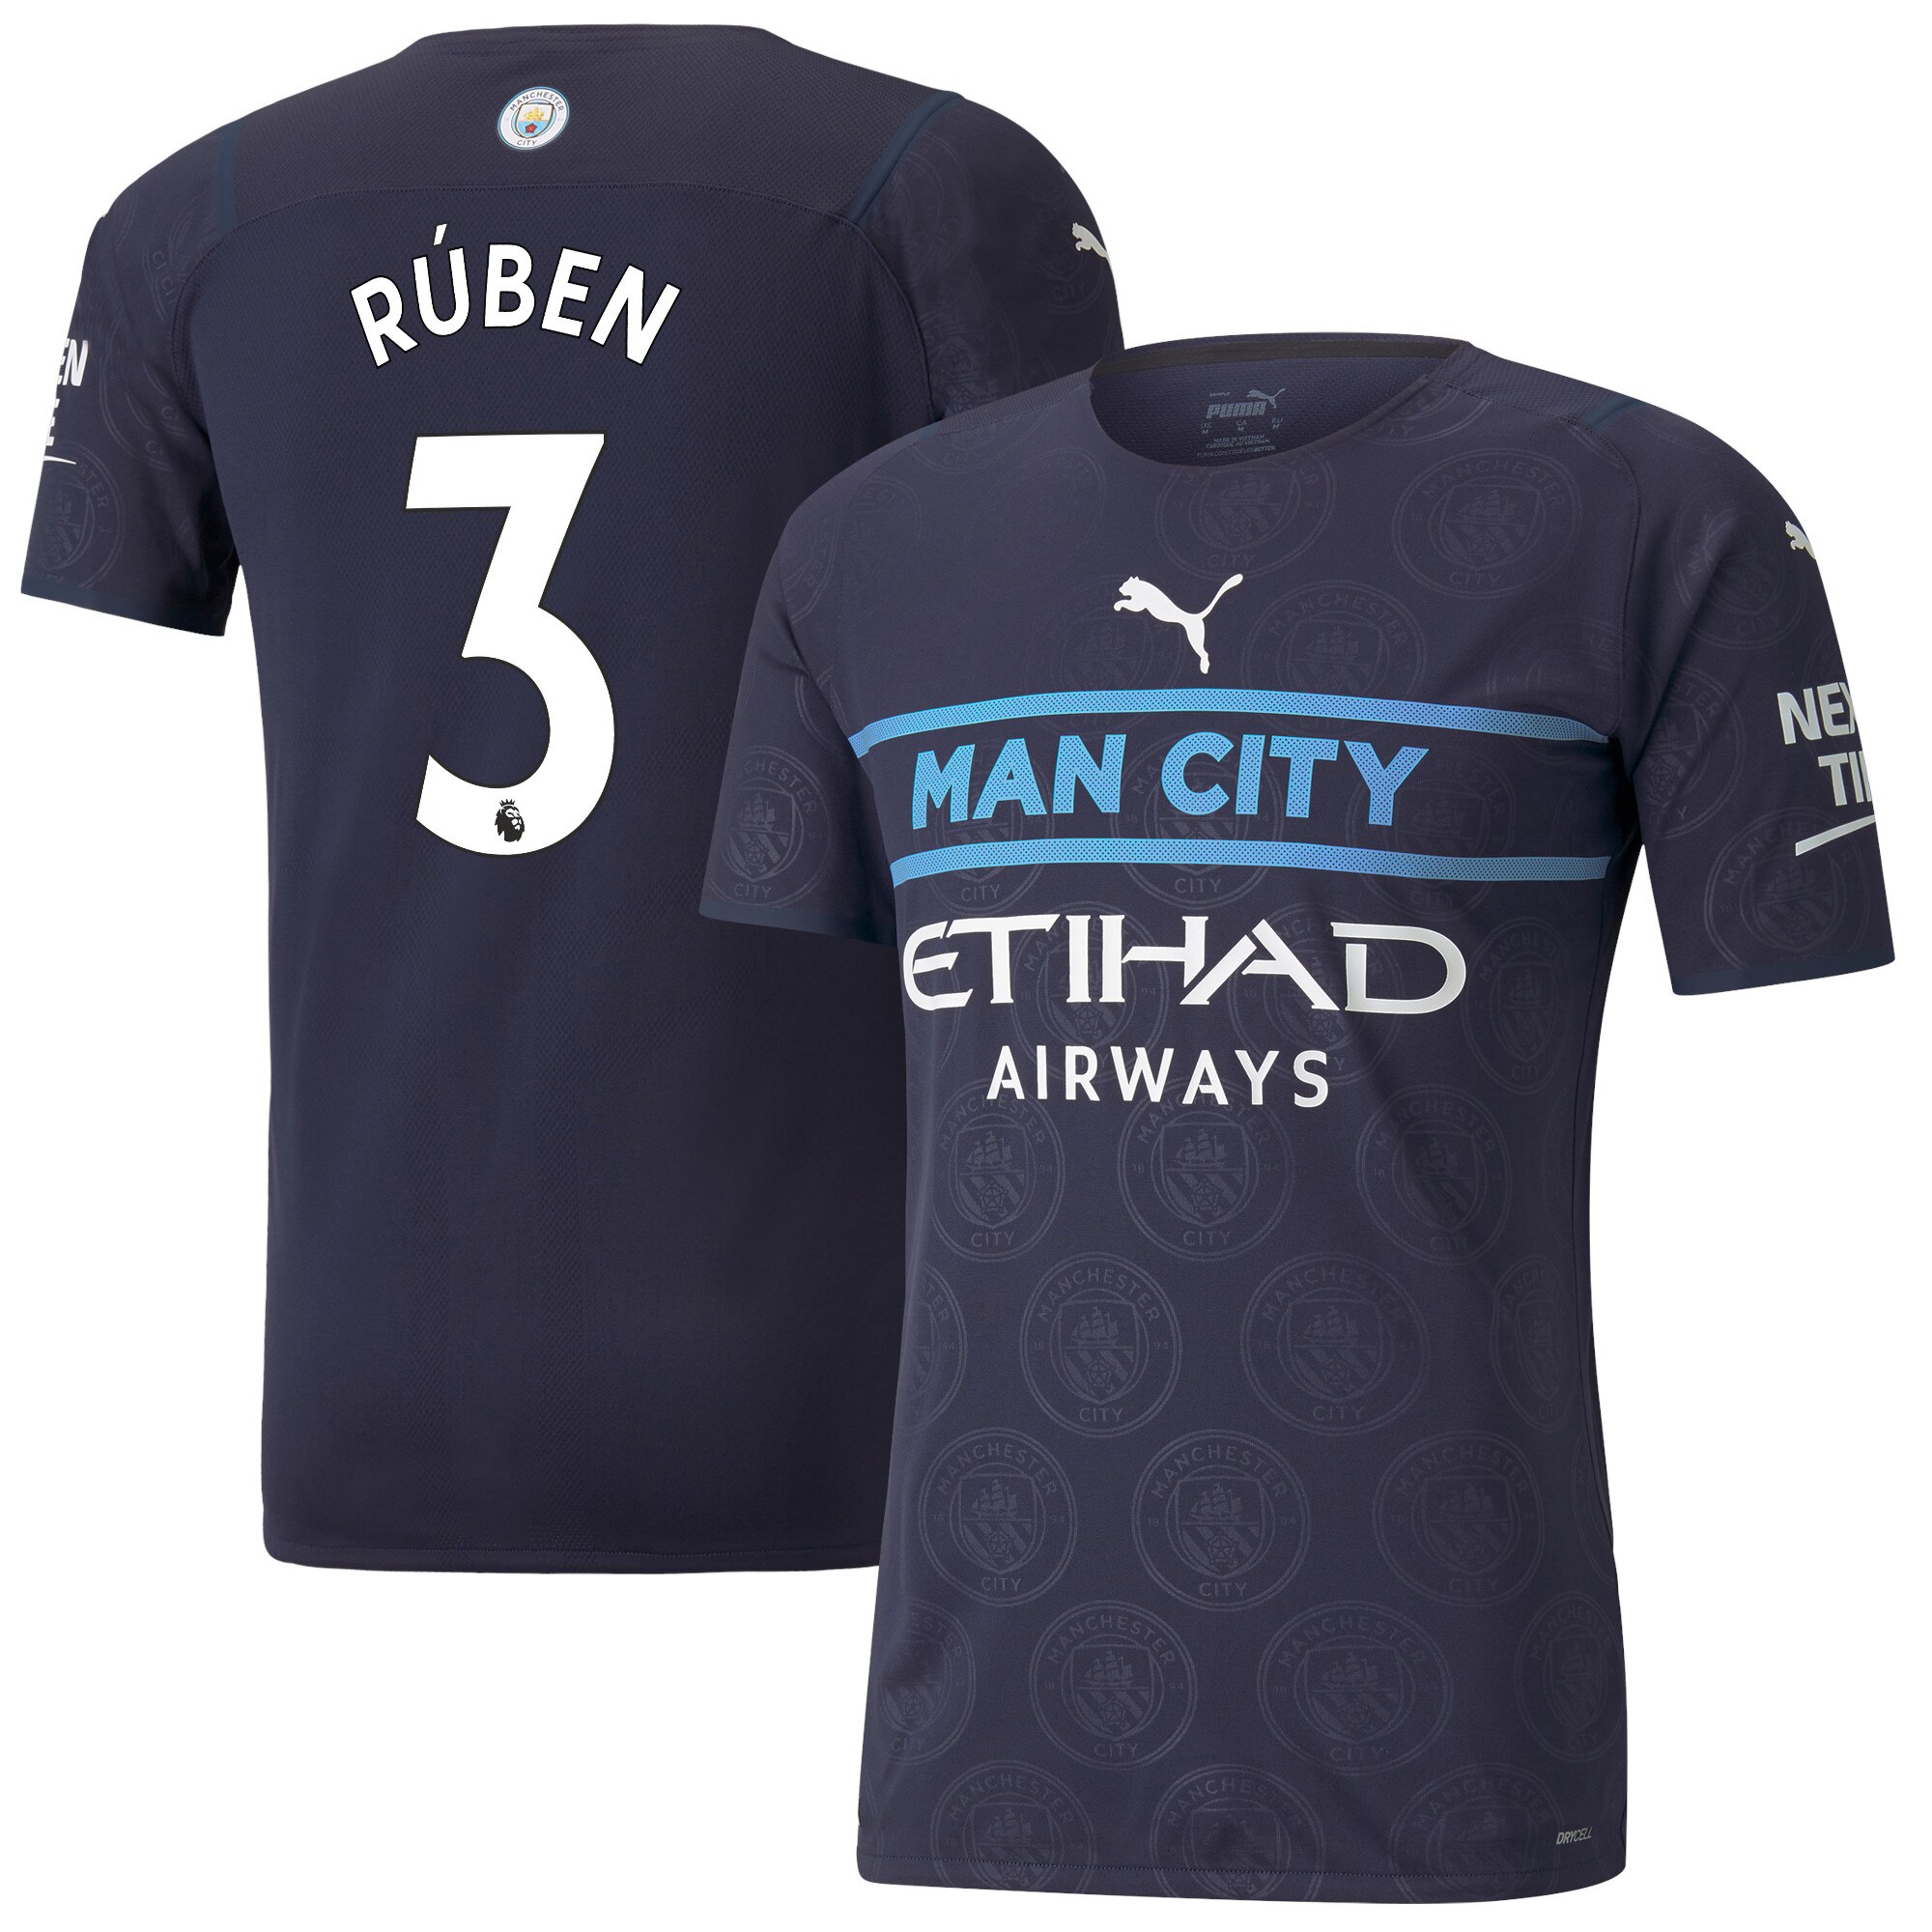 Manchester City Authentic Third Shirt 2021-22 with Rúben 3 printing